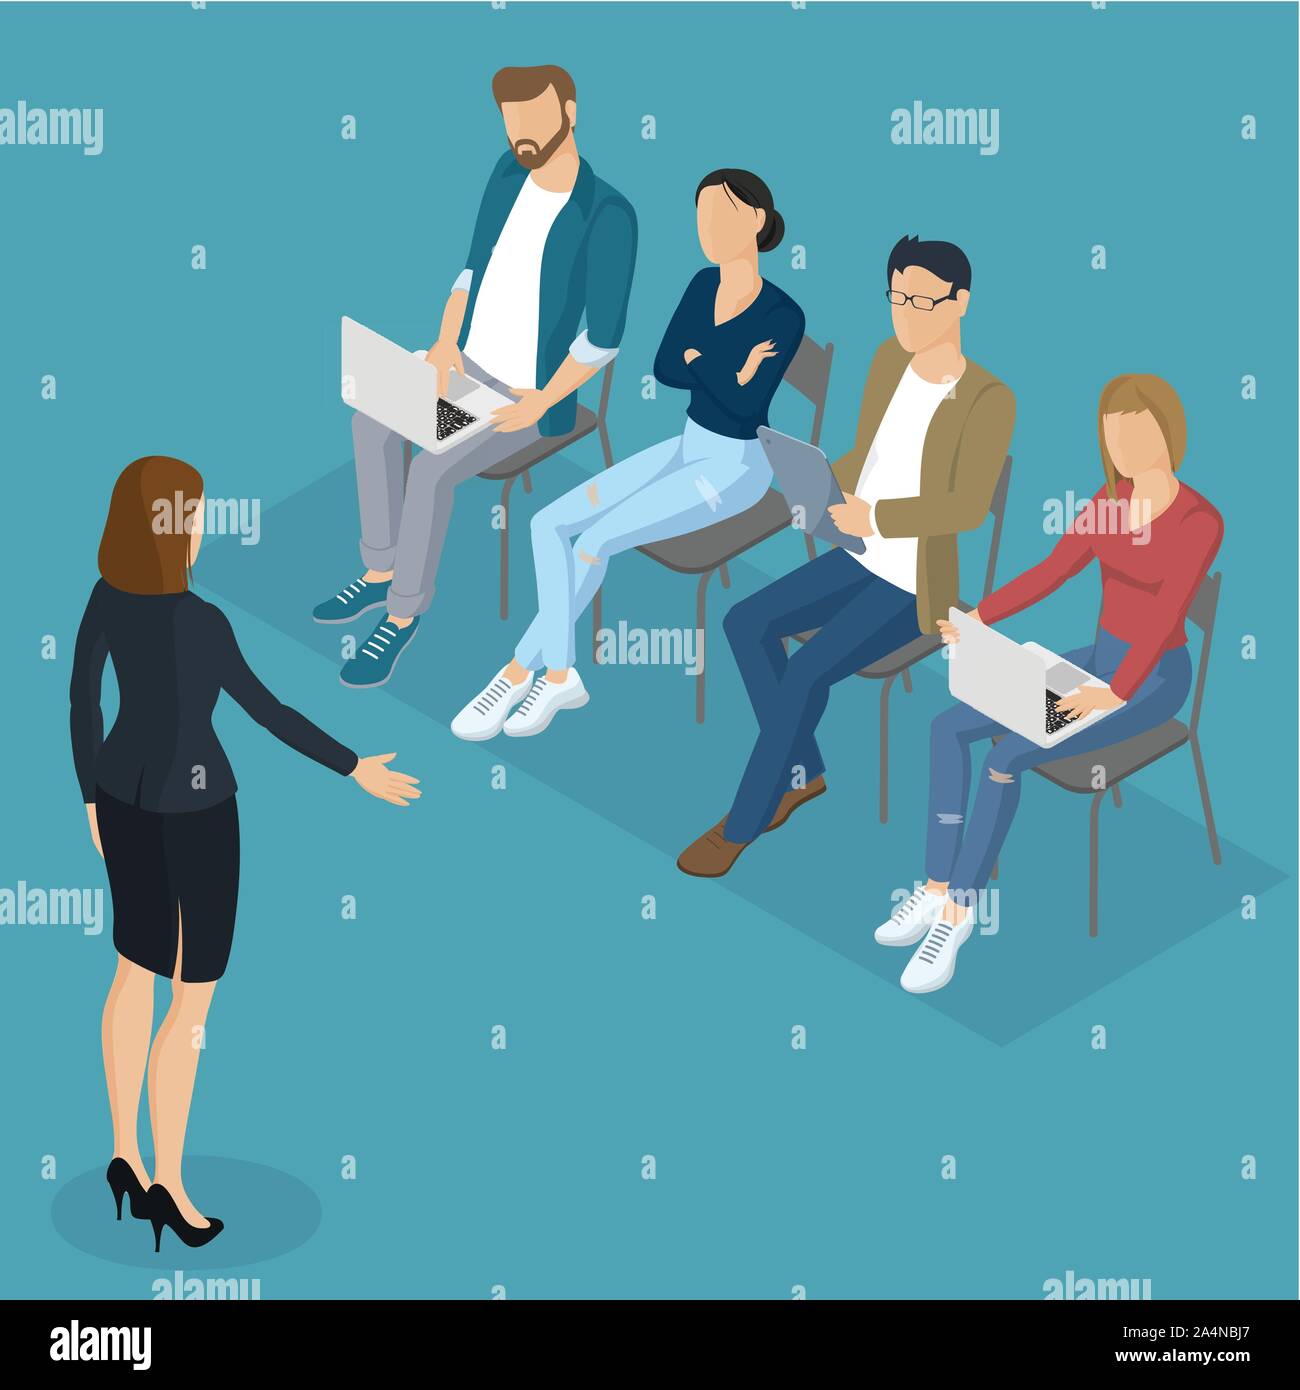 Isometric people briefing Stock Vector